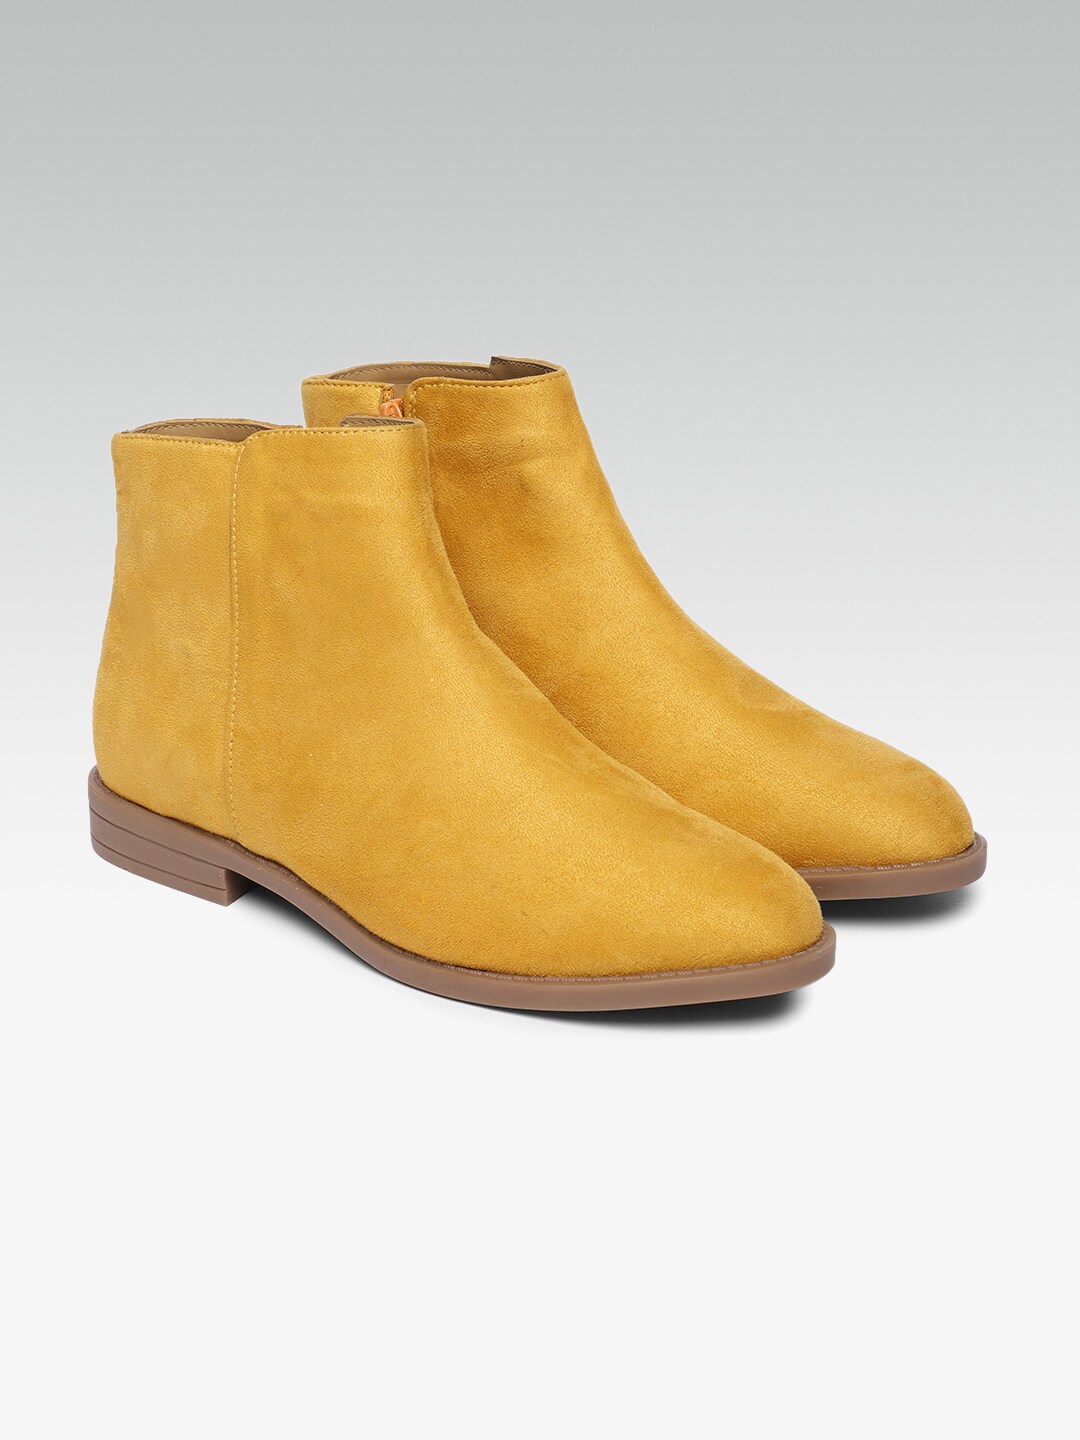 Carlton London Women Mustard Yellow Solid Mid-Top Flat Boots Price in India